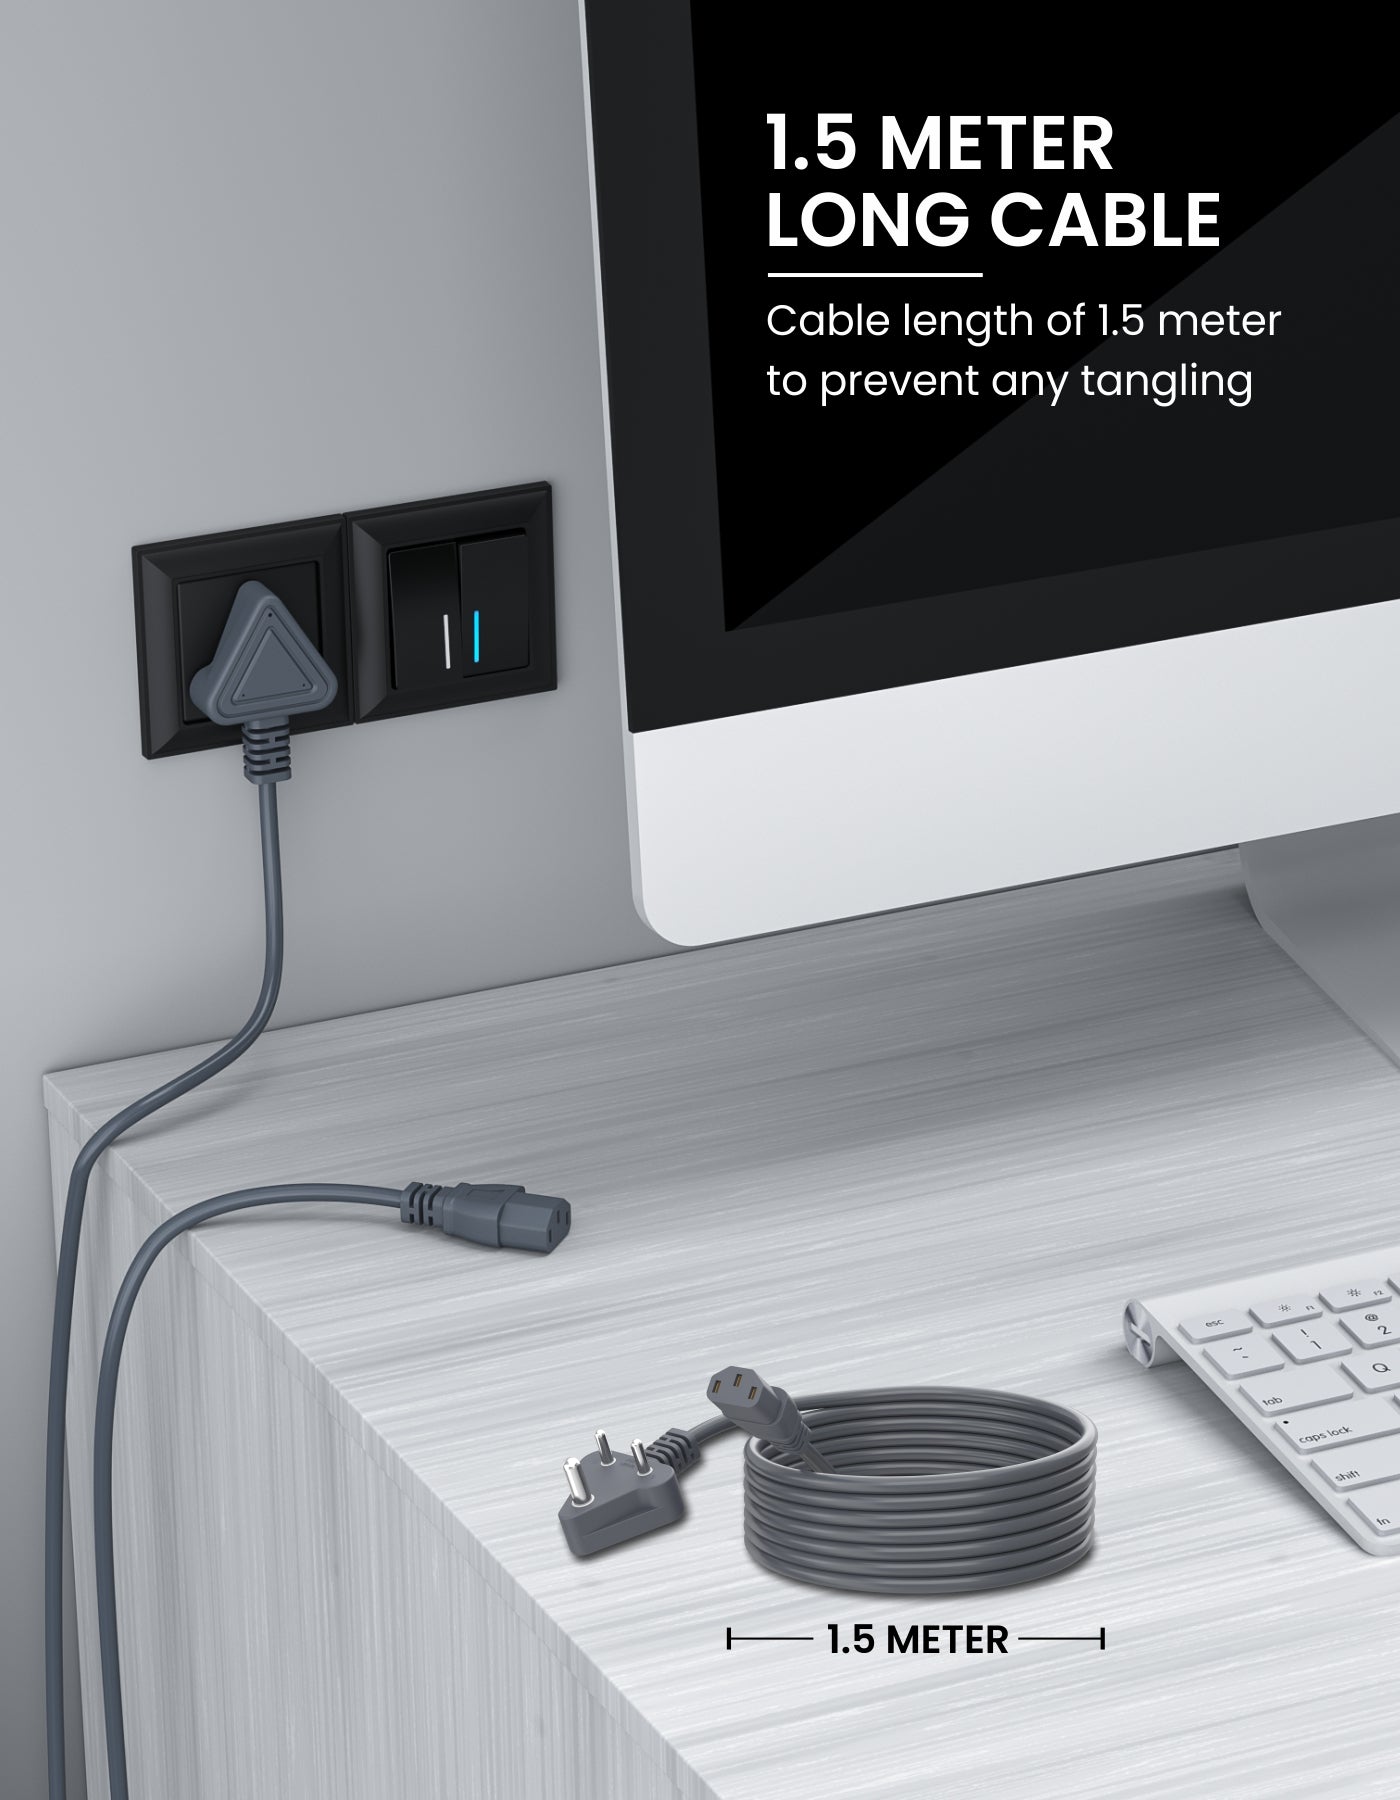 Portronics Konnect G1 3-Prong Power Connector  Cable length of 1.5 meter to prevent any tangling